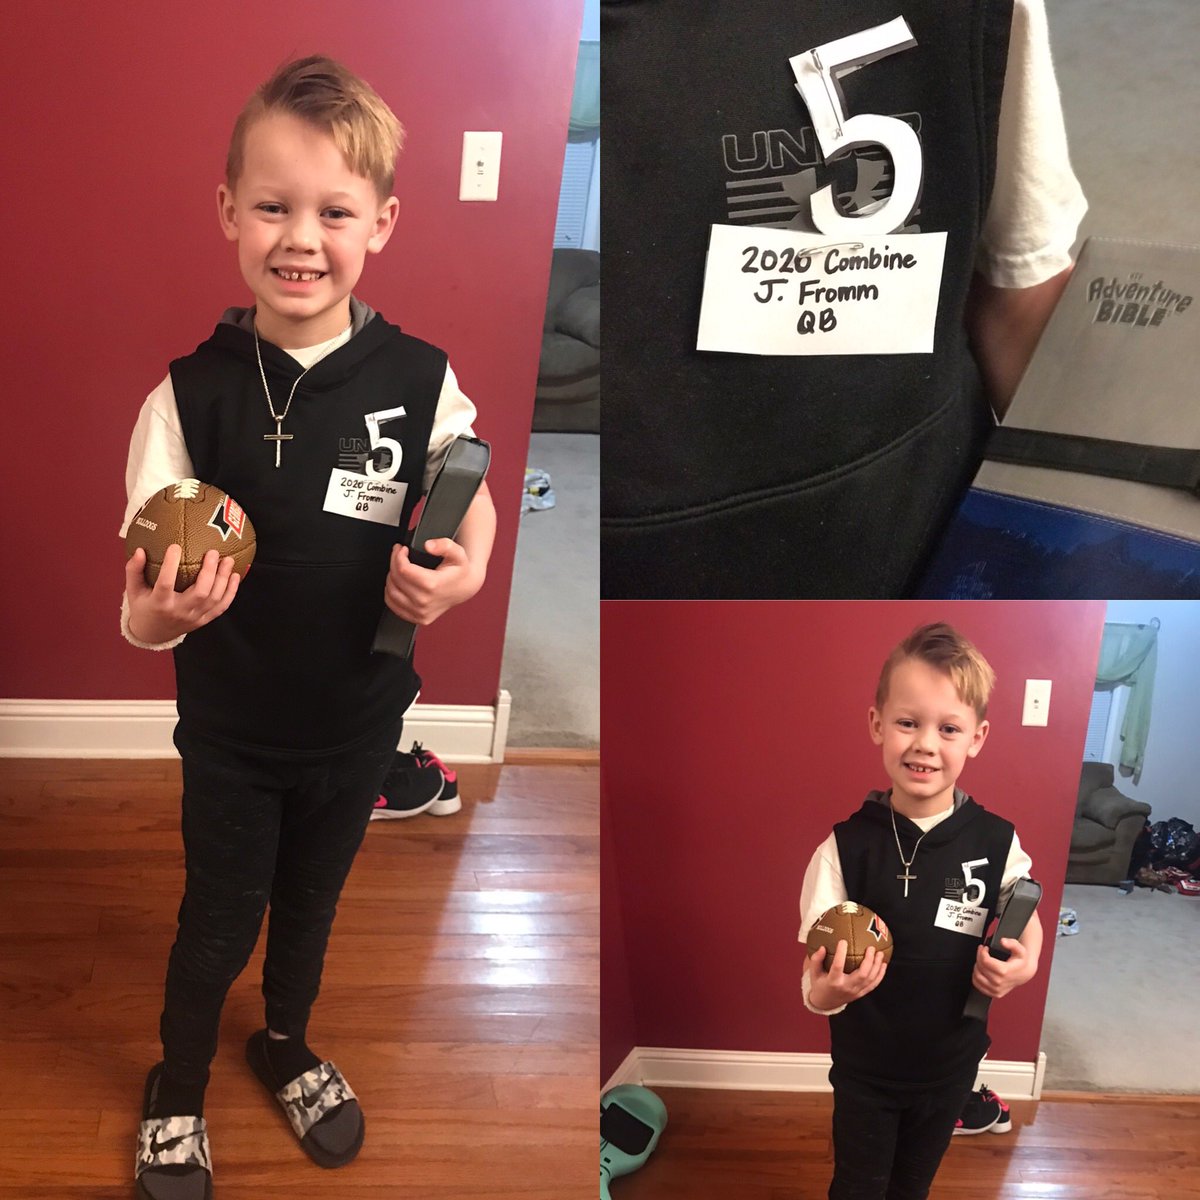 Today is Dress up like your favorite person Day” at school! Brantley chose @FrommJake of course! But not UGA Jake...  NFL Combine Jake! #FaithandFootball